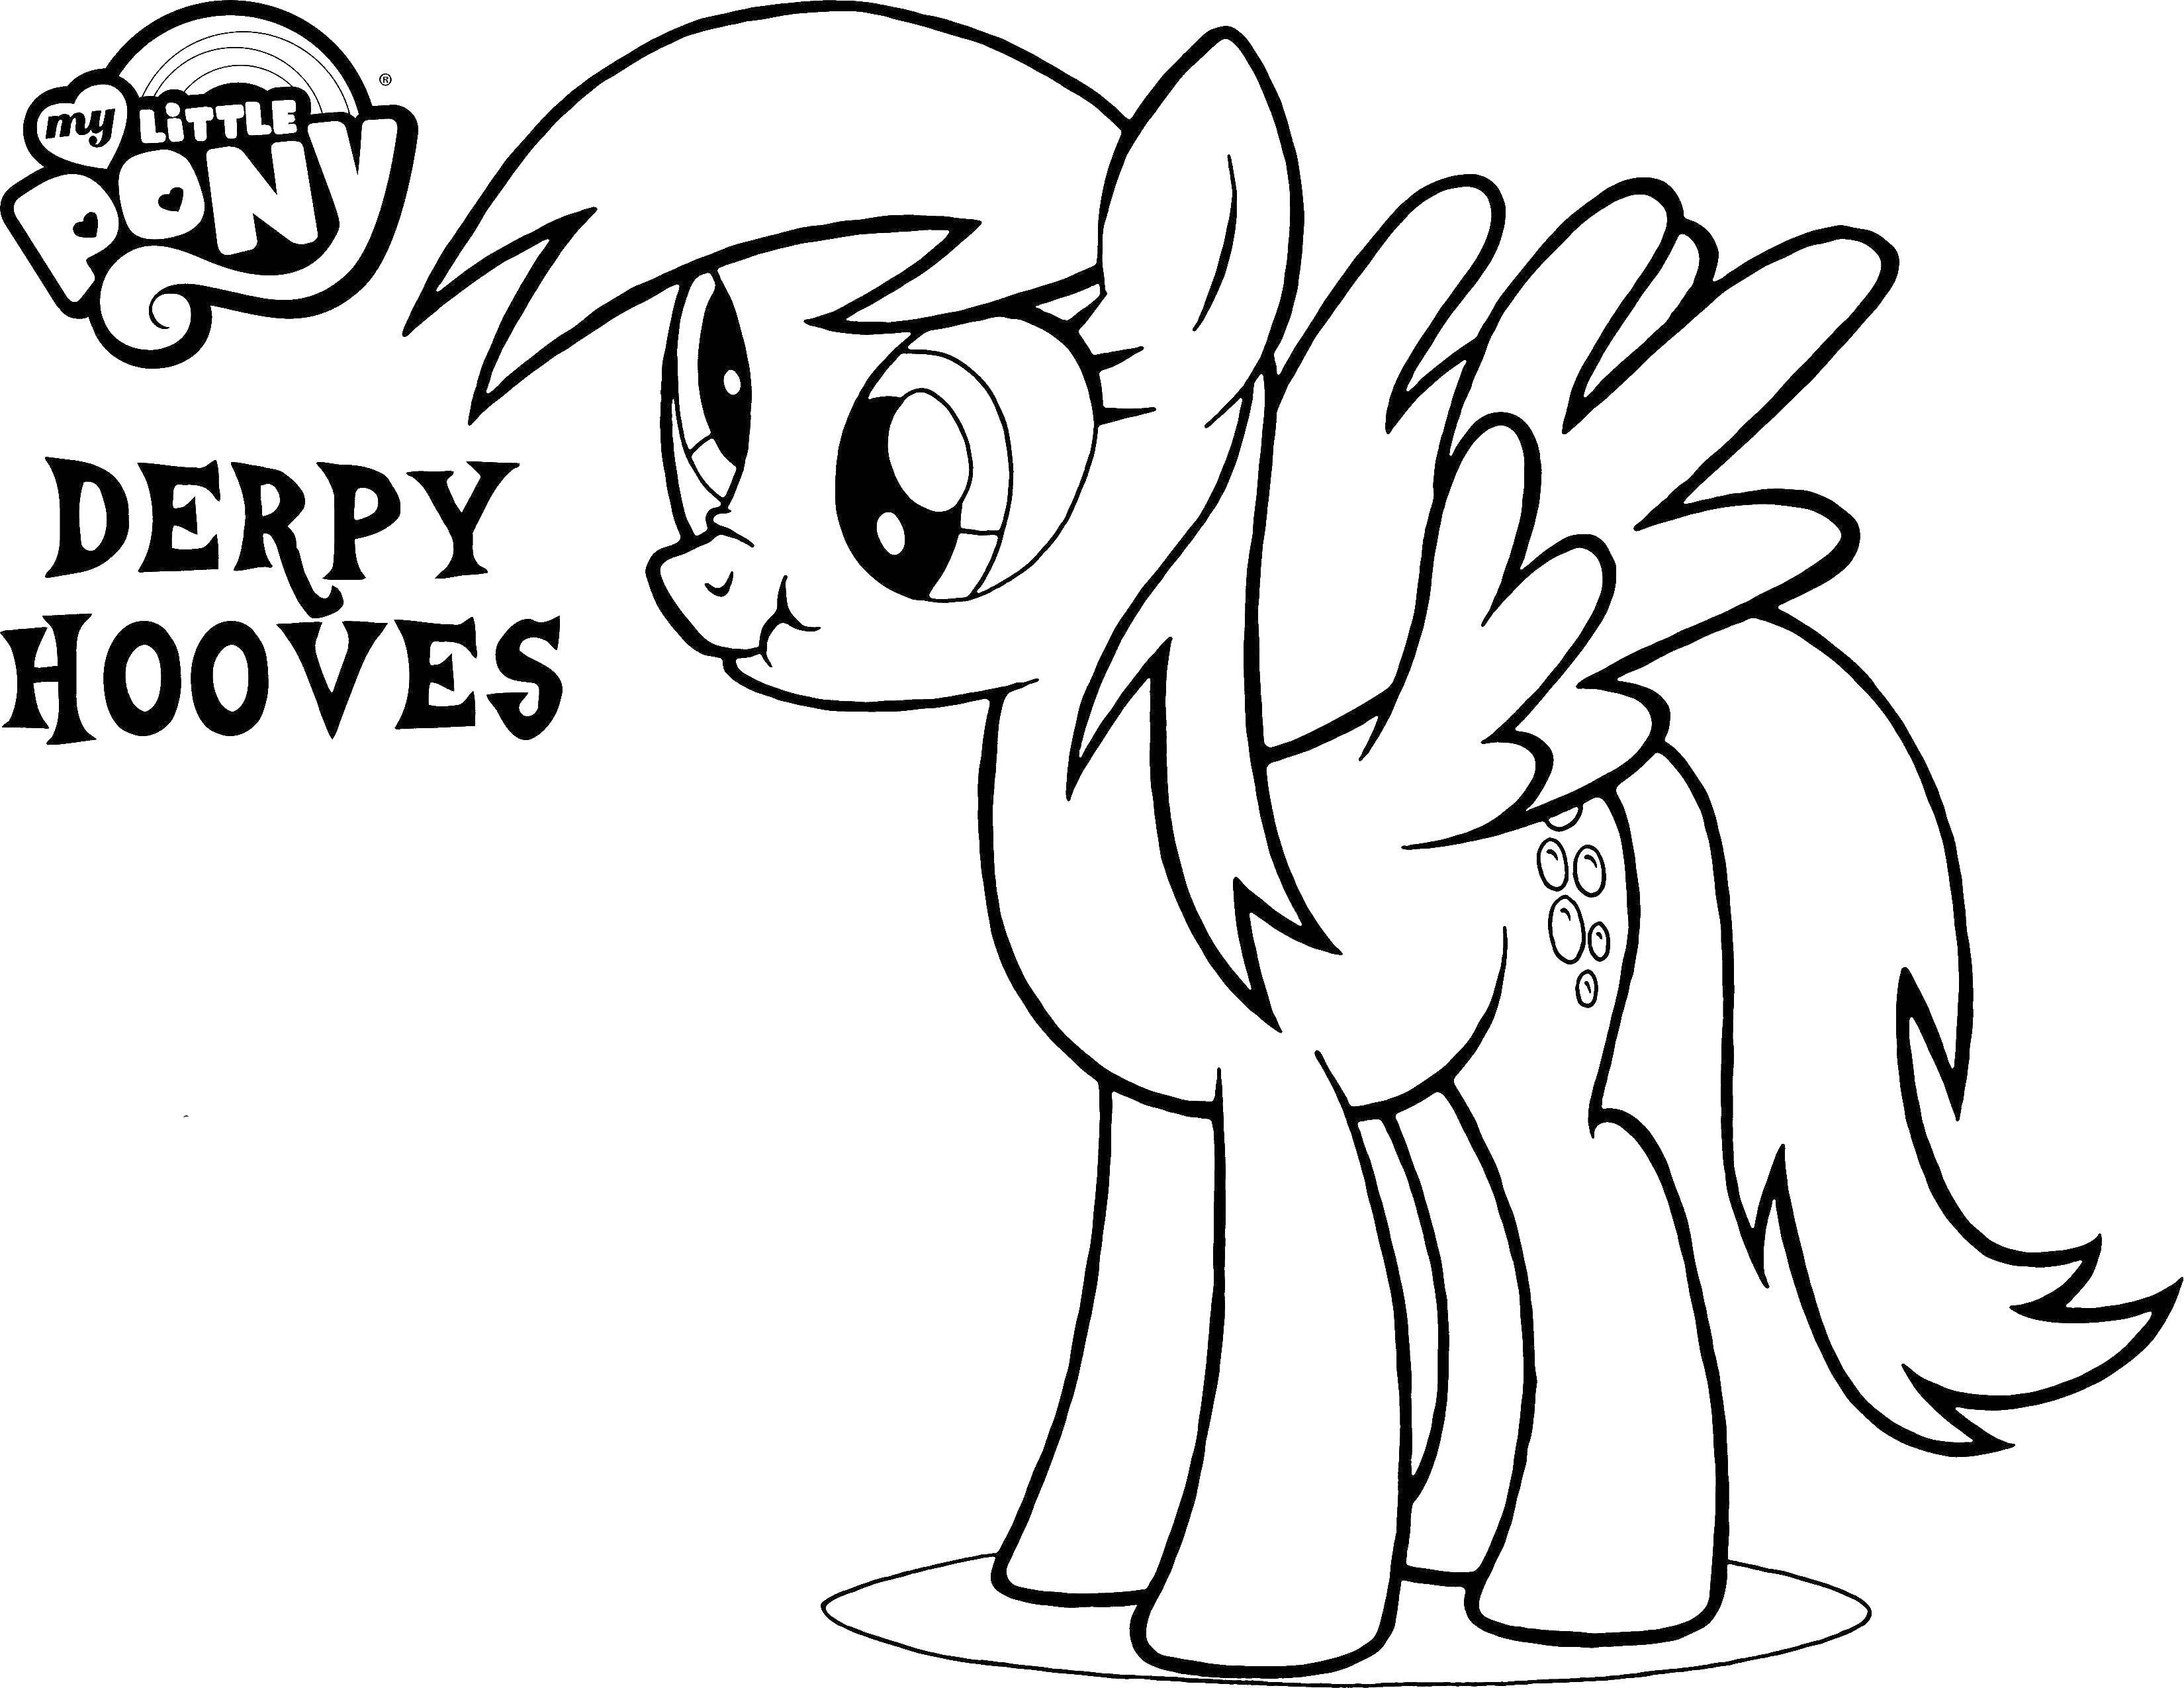 Coloring My little pony derpy, hows. Category cartoons. Tags:  ponies, derpy.